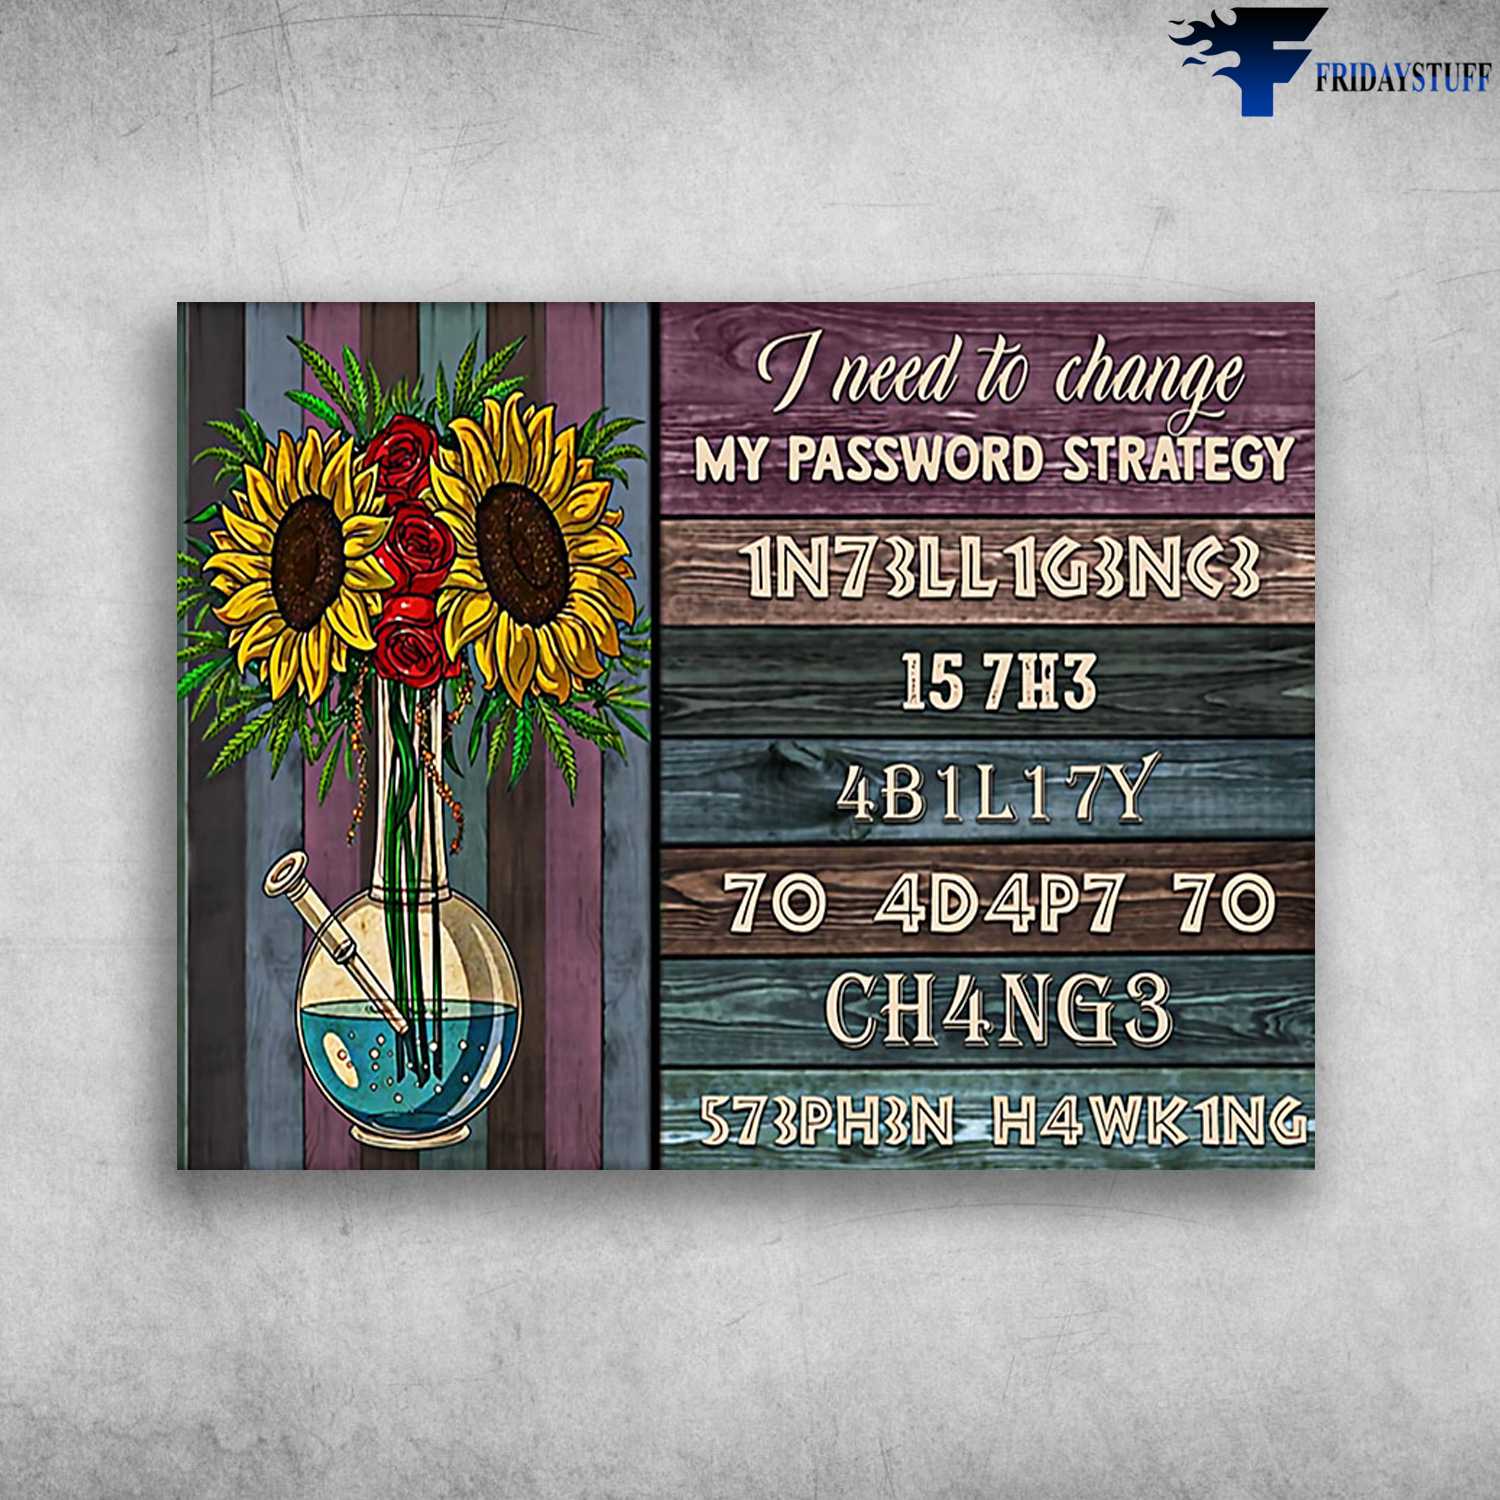 Sunflower Poster - I Need To Chang My Password Strategy, 1N73LL1G3NC3, 15 7H3, 70 4D4P7 70